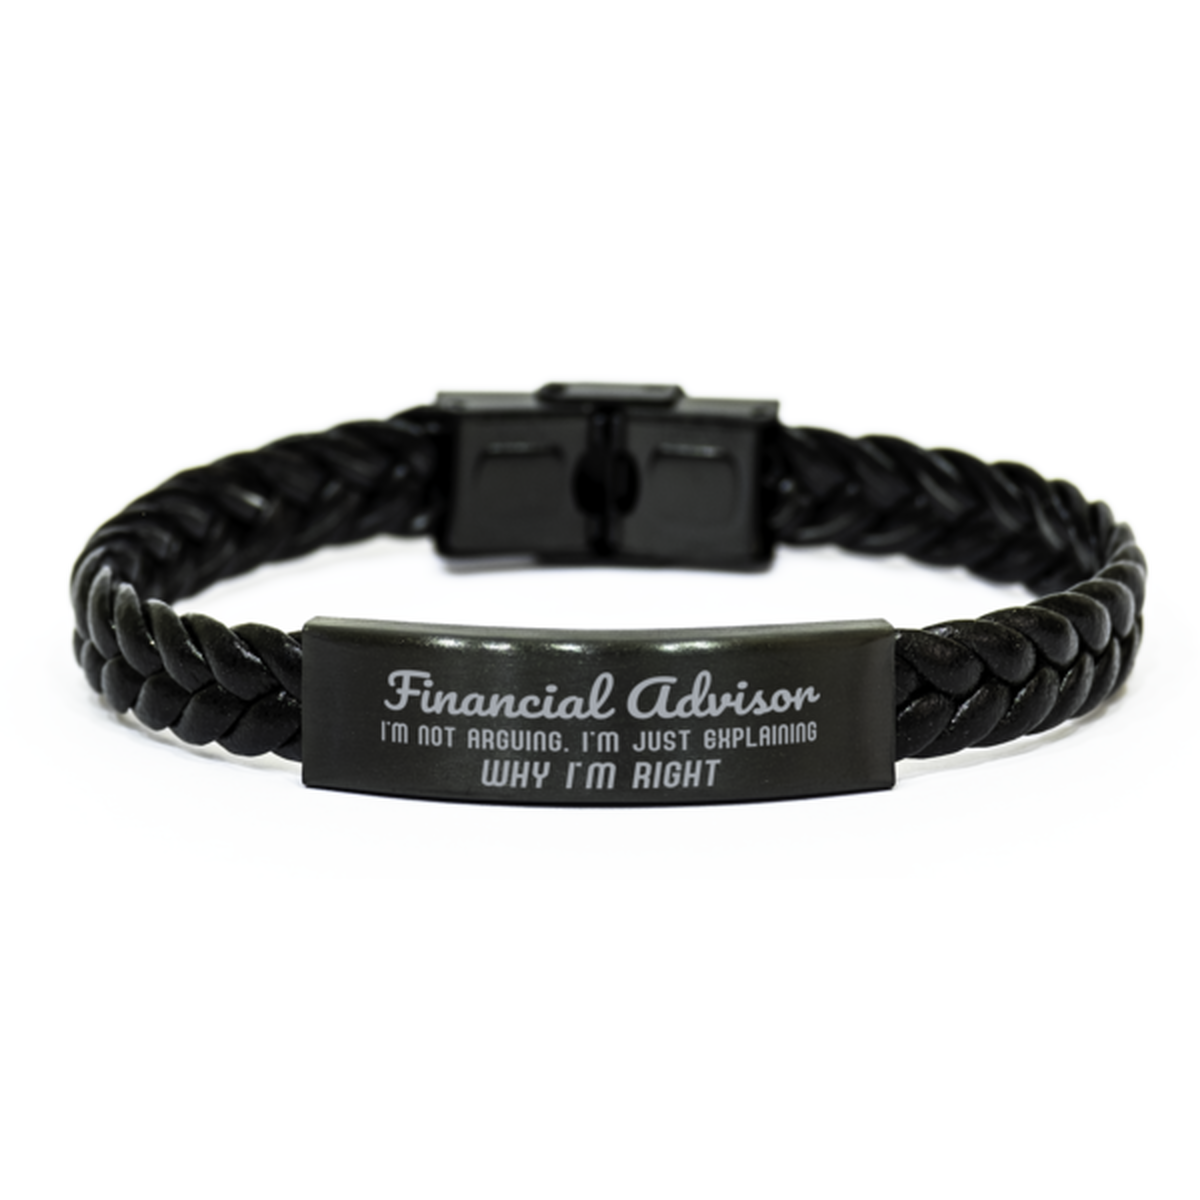 Financial Advisor I'm not Arguing. I'm Just Explaining Why I'm RIGHT Braided Leather Bracelet, Graduation Birthday Christmas Financial Advisor Gifts For Financial Advisor Funny Saying Quote Present for Men Women Coworker